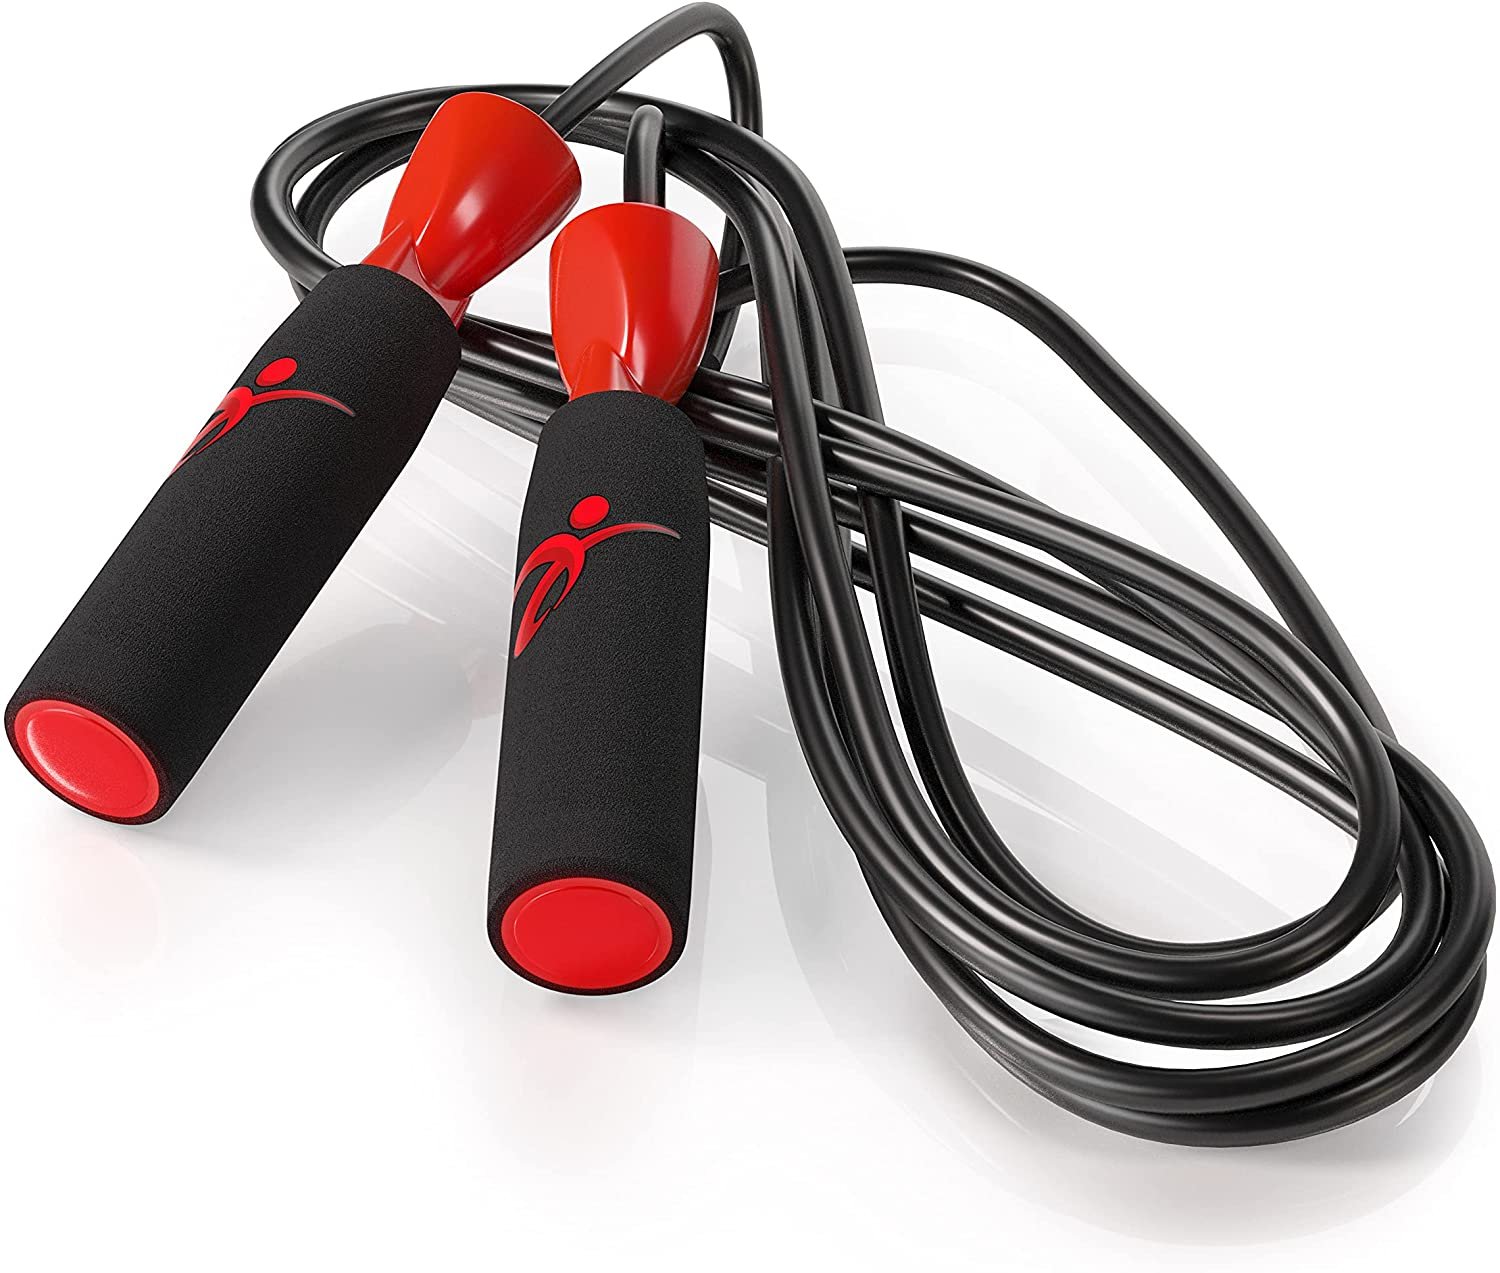 Benefits of Jumping Rope - Why It Is The Best Exercise?